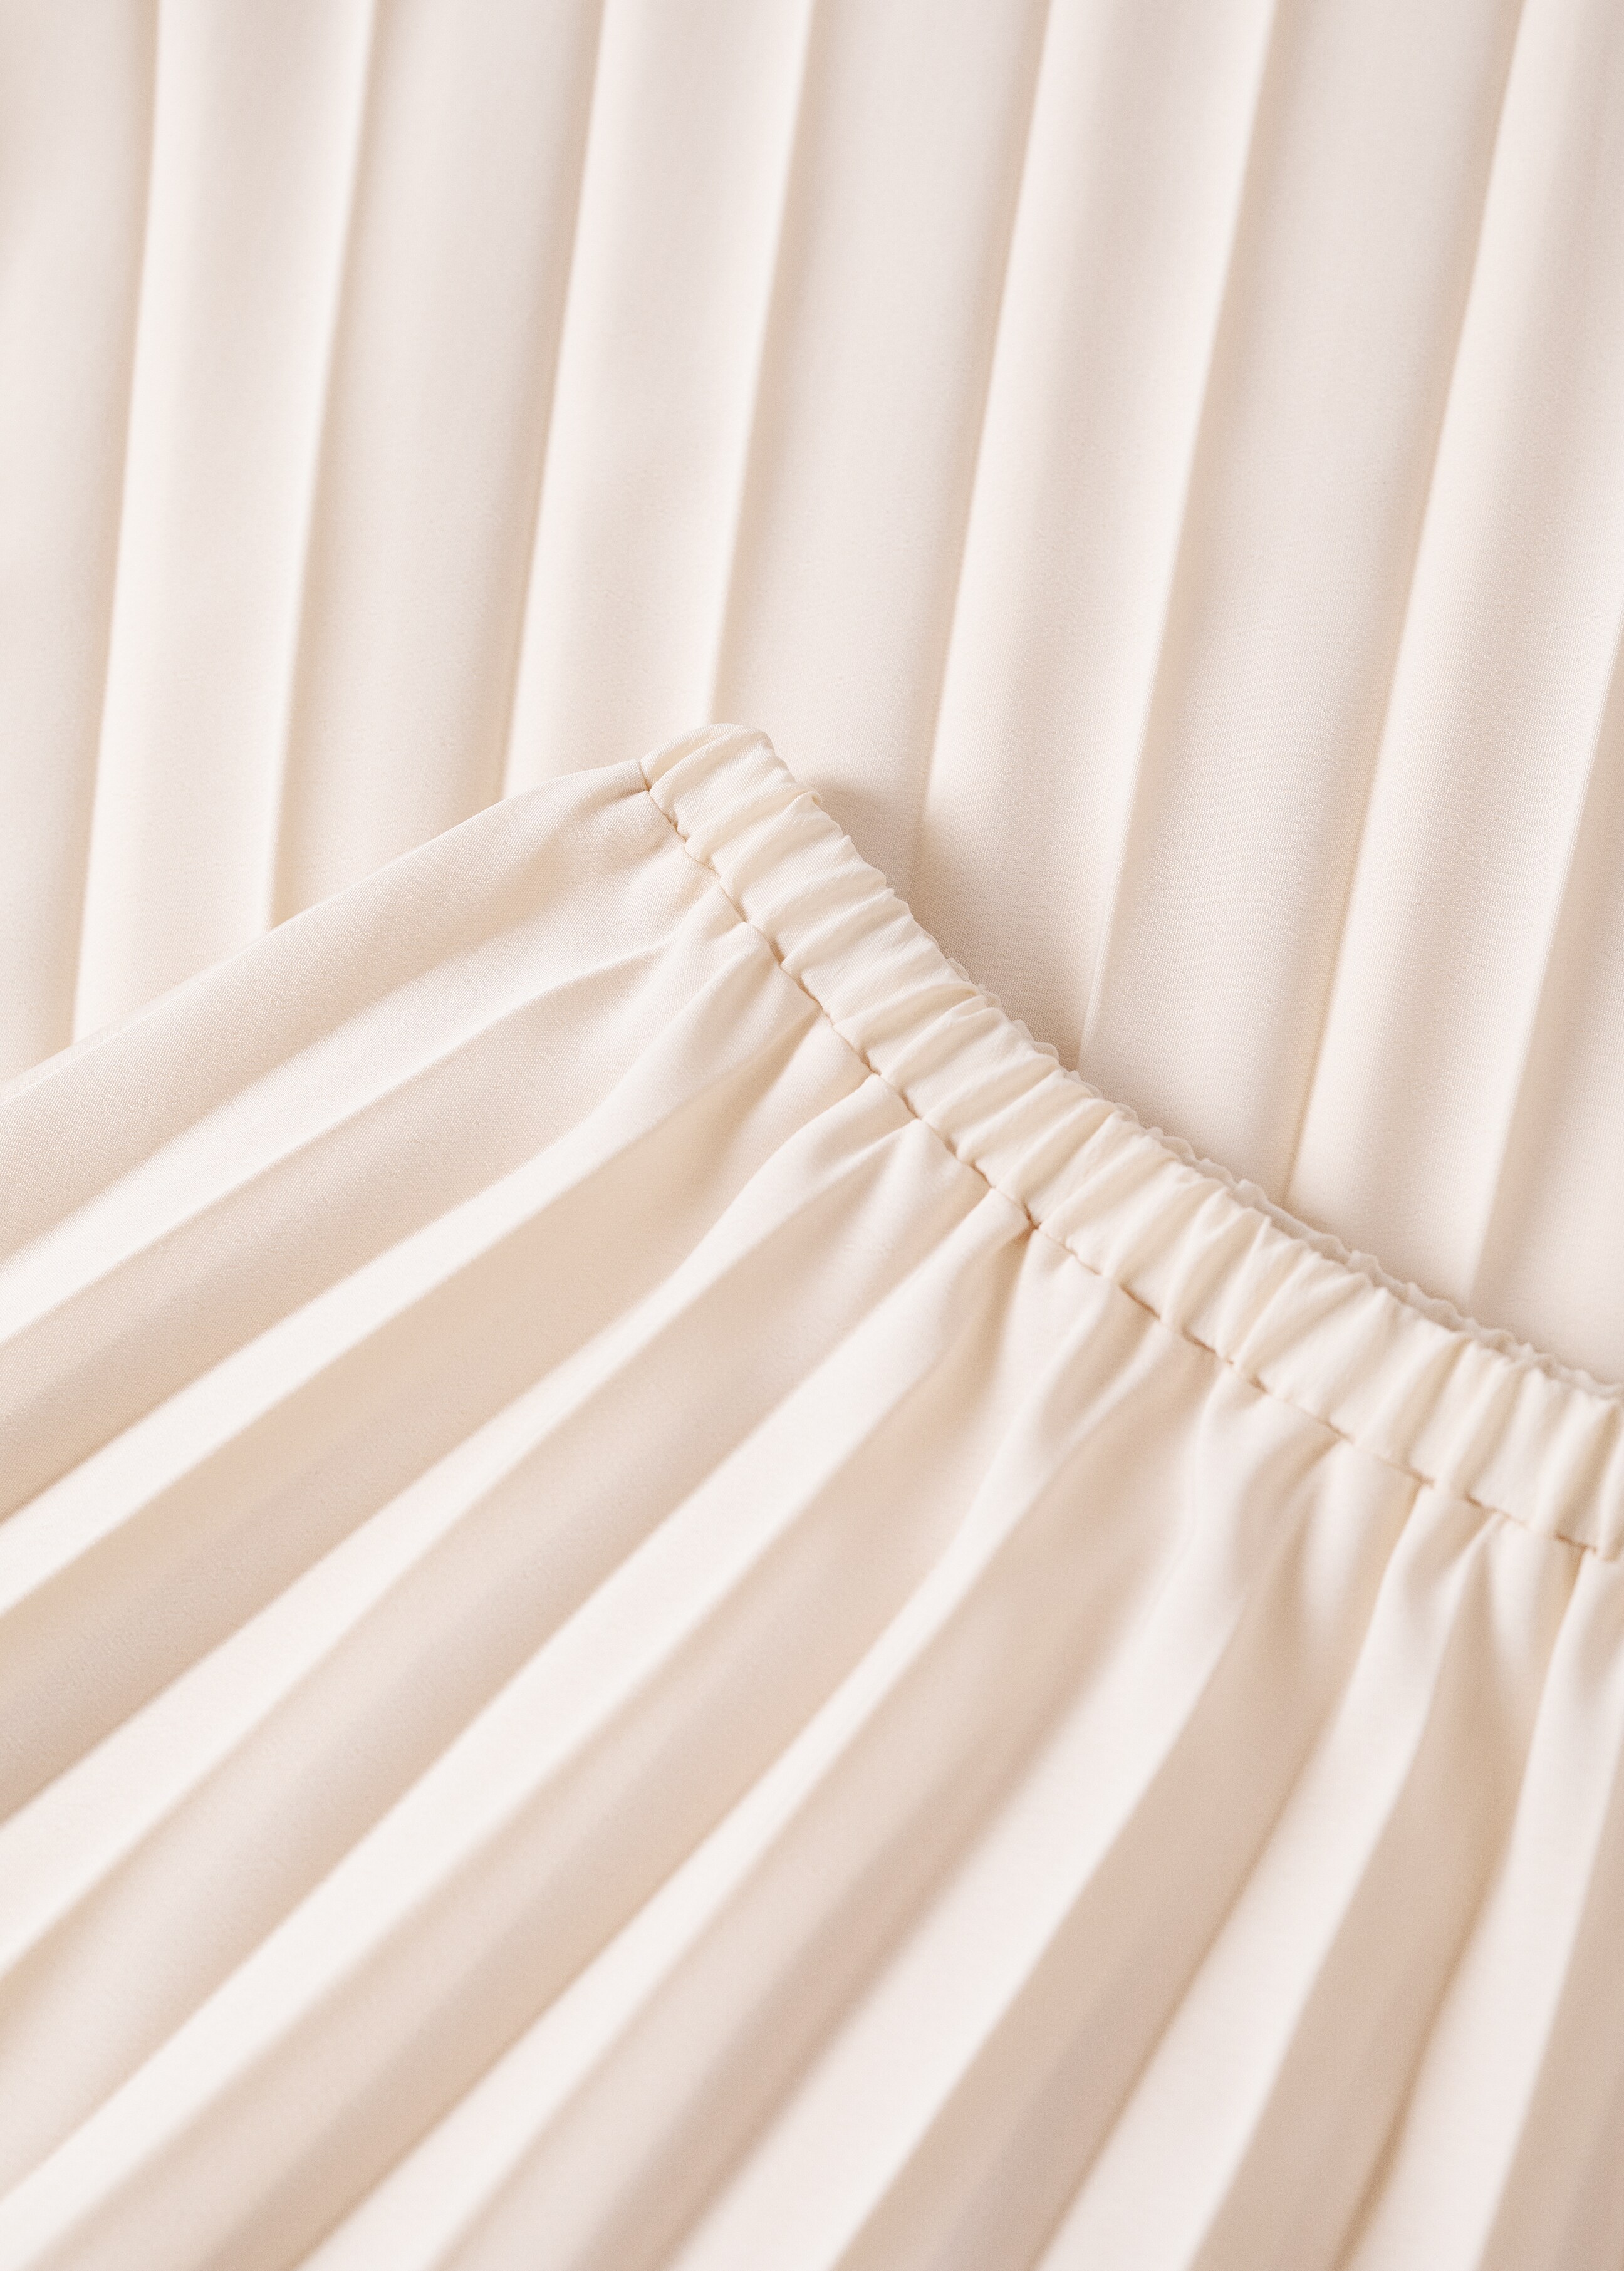 Pleated long skirt - Details of the article 8